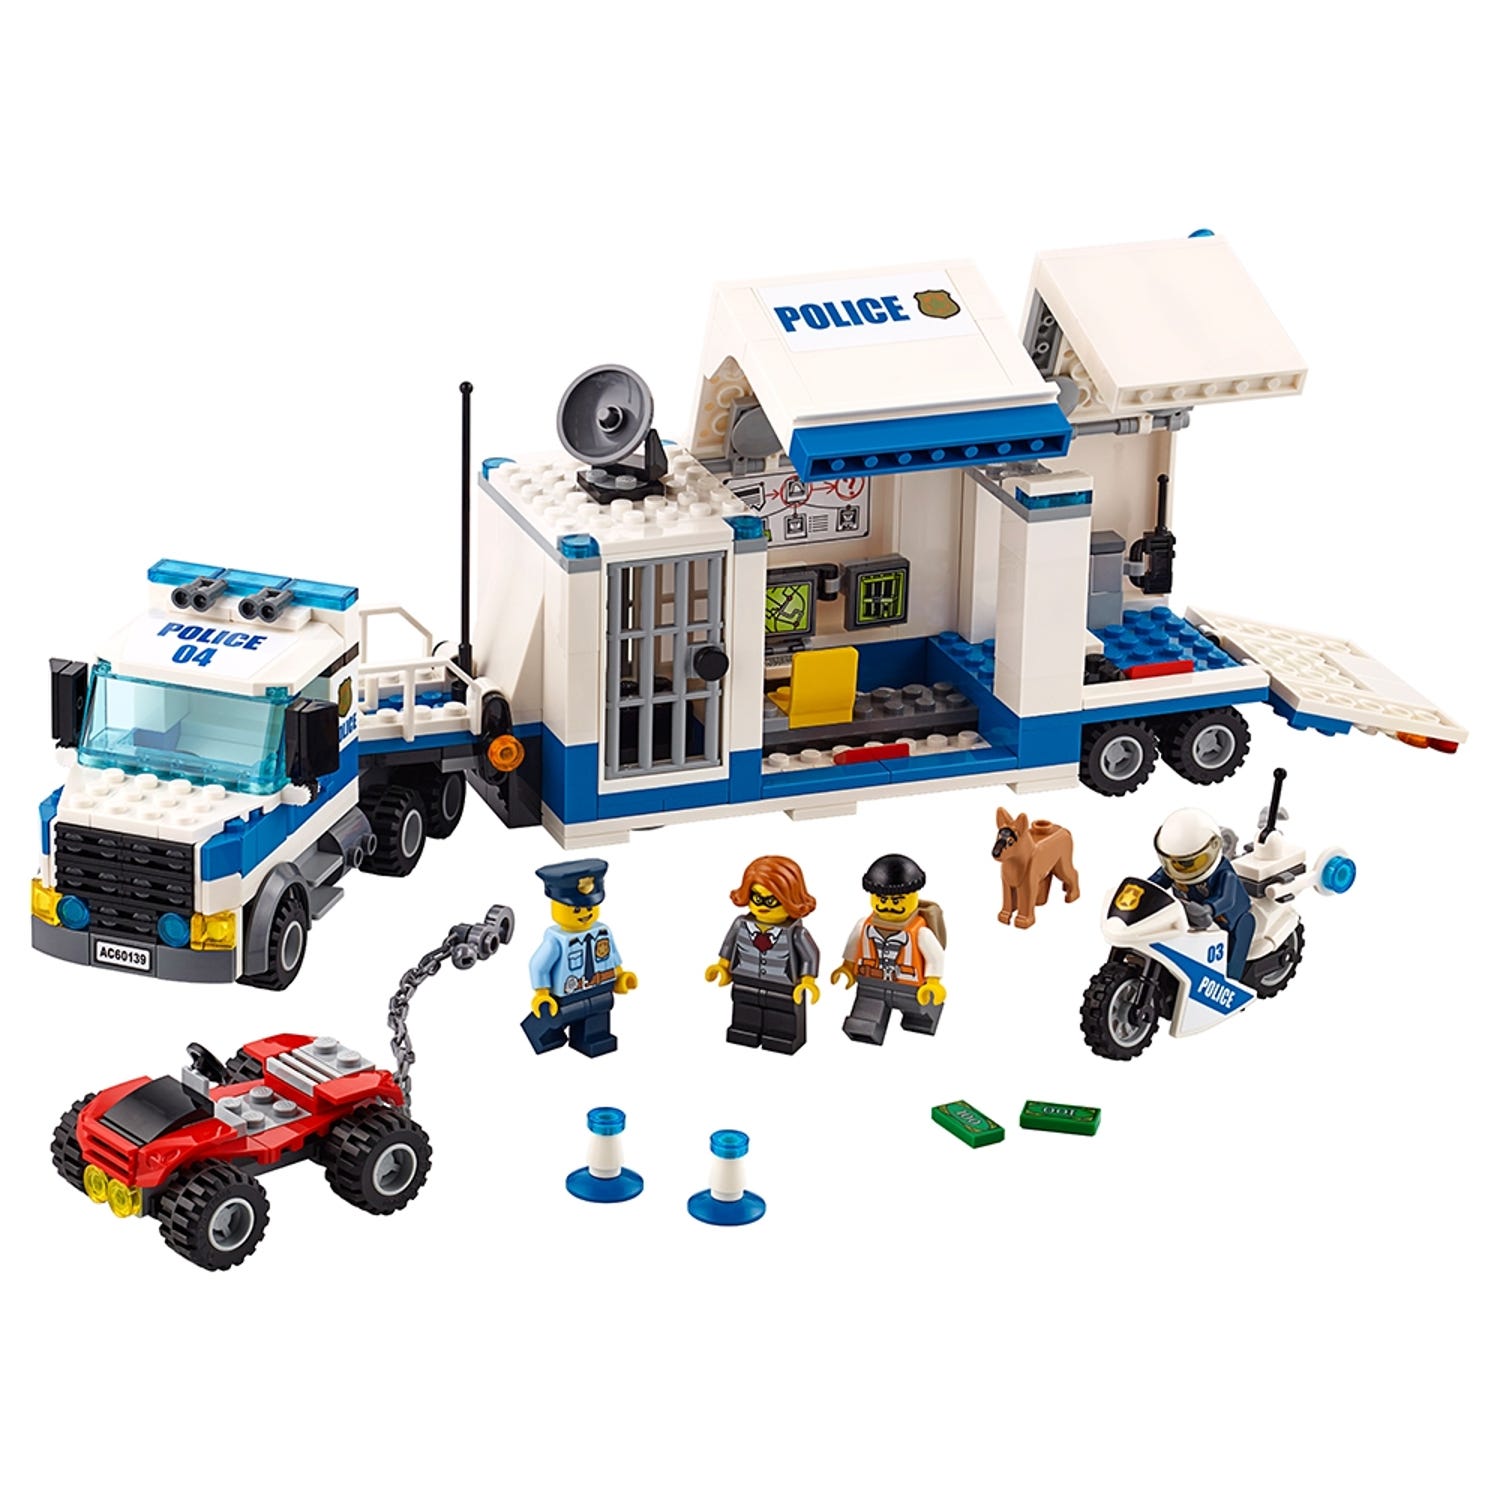 Mobile Command Center 60139 | City | Buy online at the LEGO® Shop US